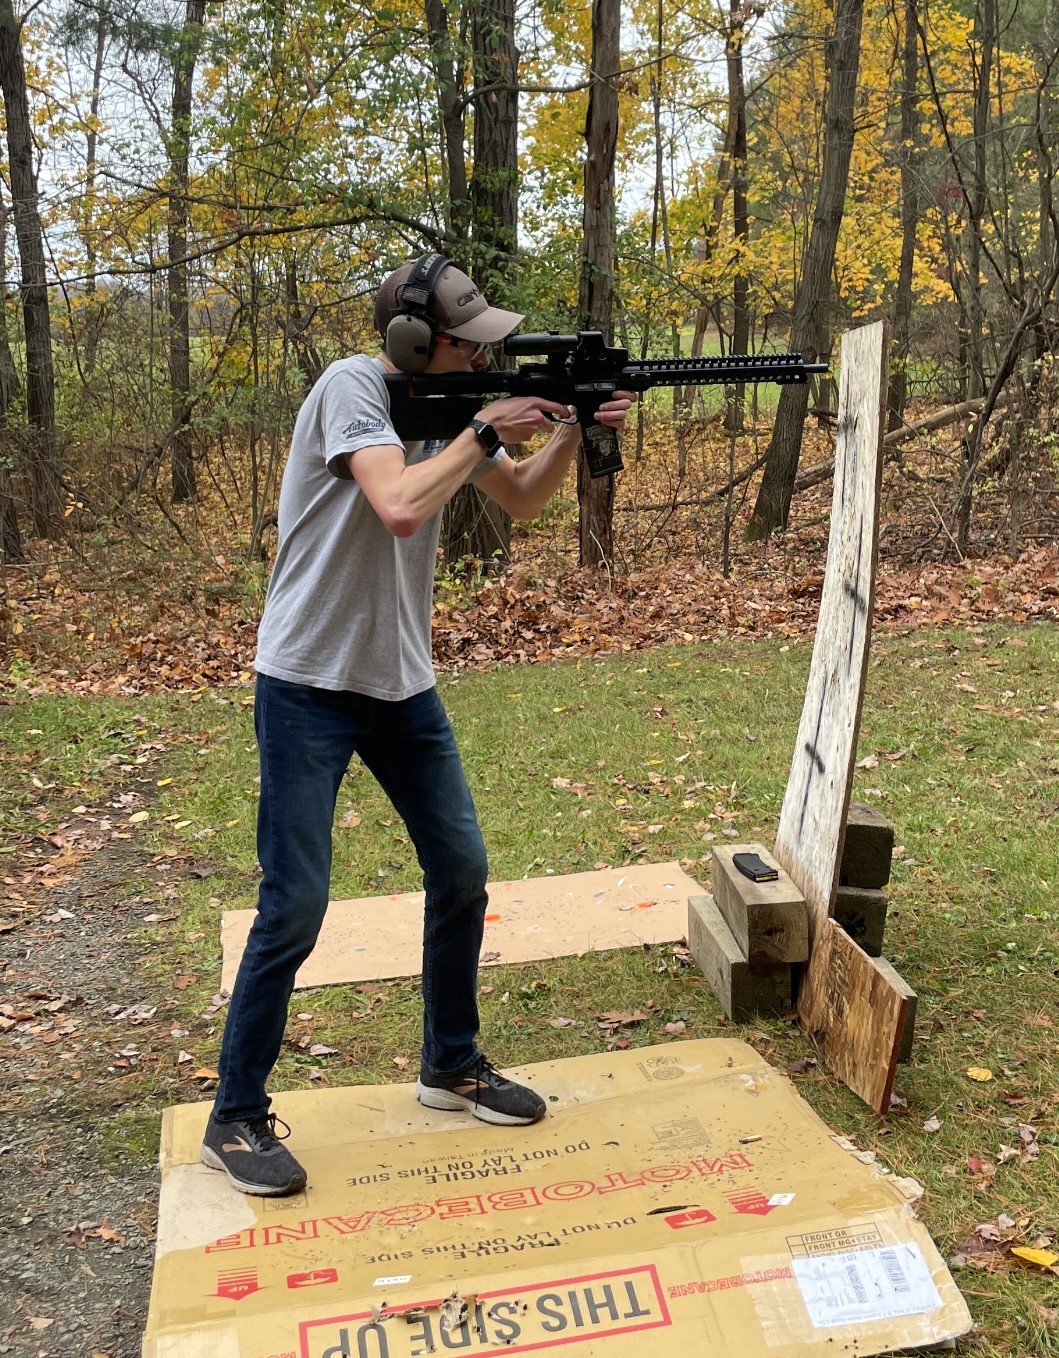 A picture of Aaron holding a rifle at an outdoor shooting range.